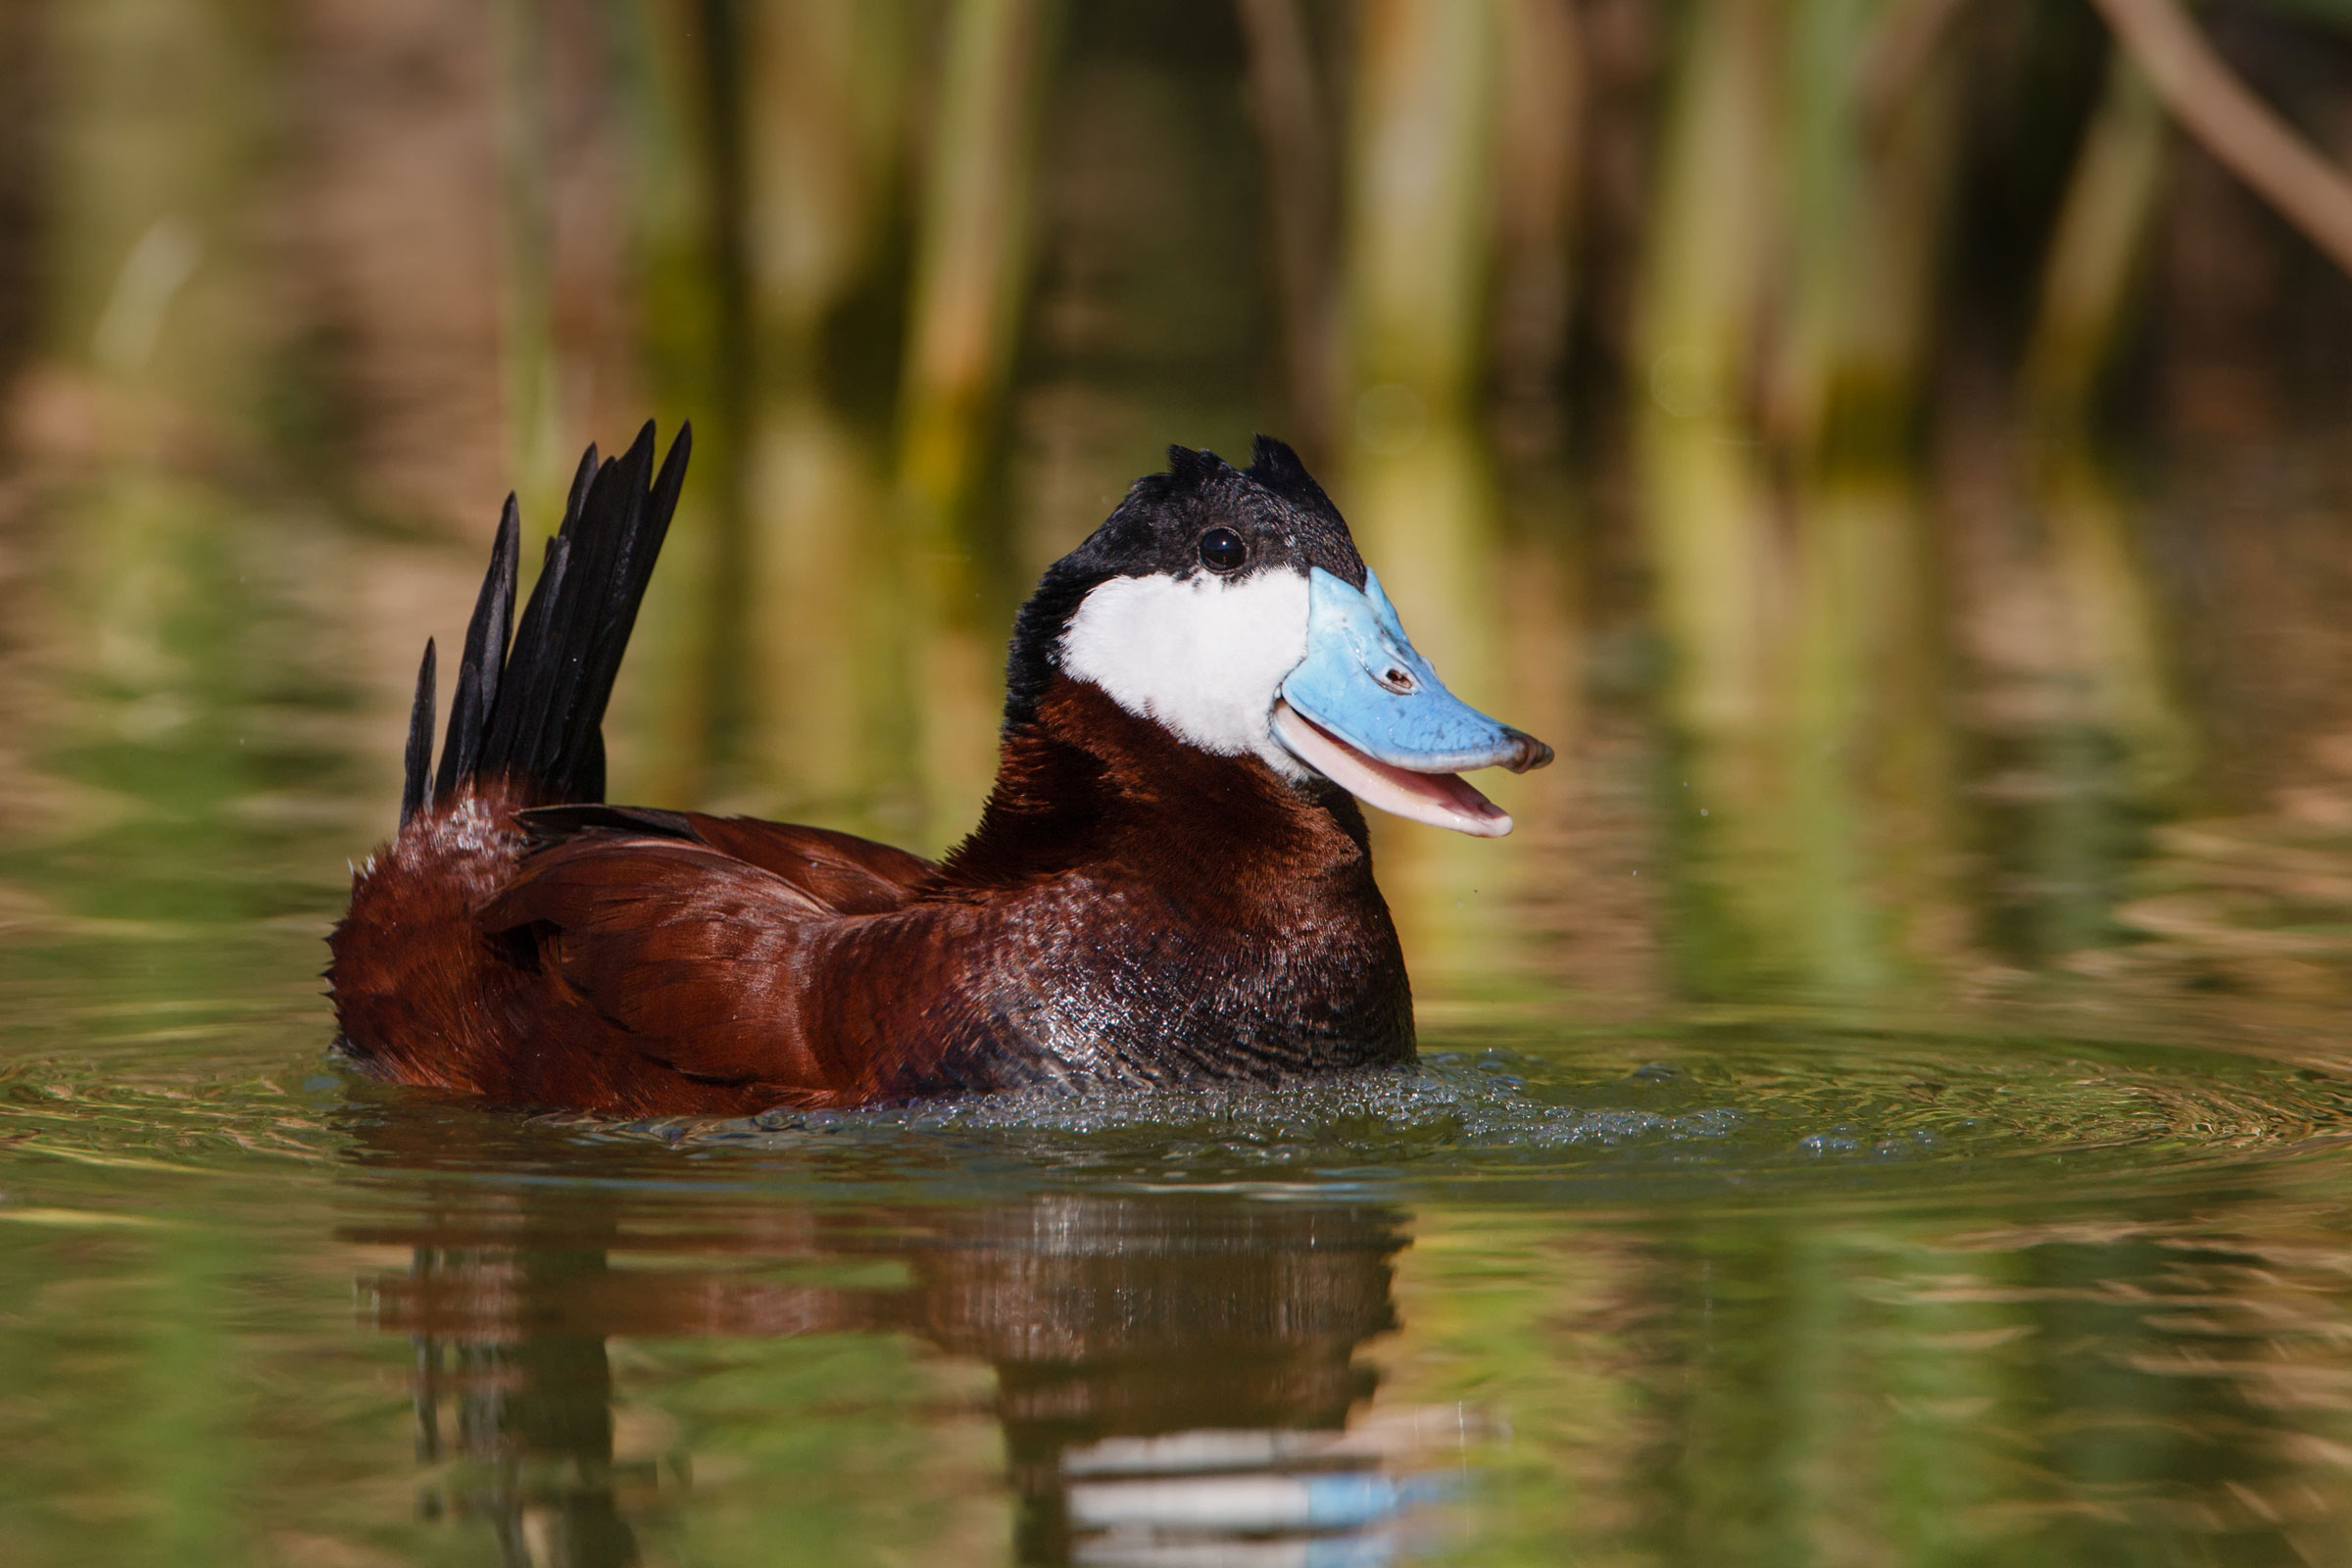 How to Take the Best Duck Photos | Audubon